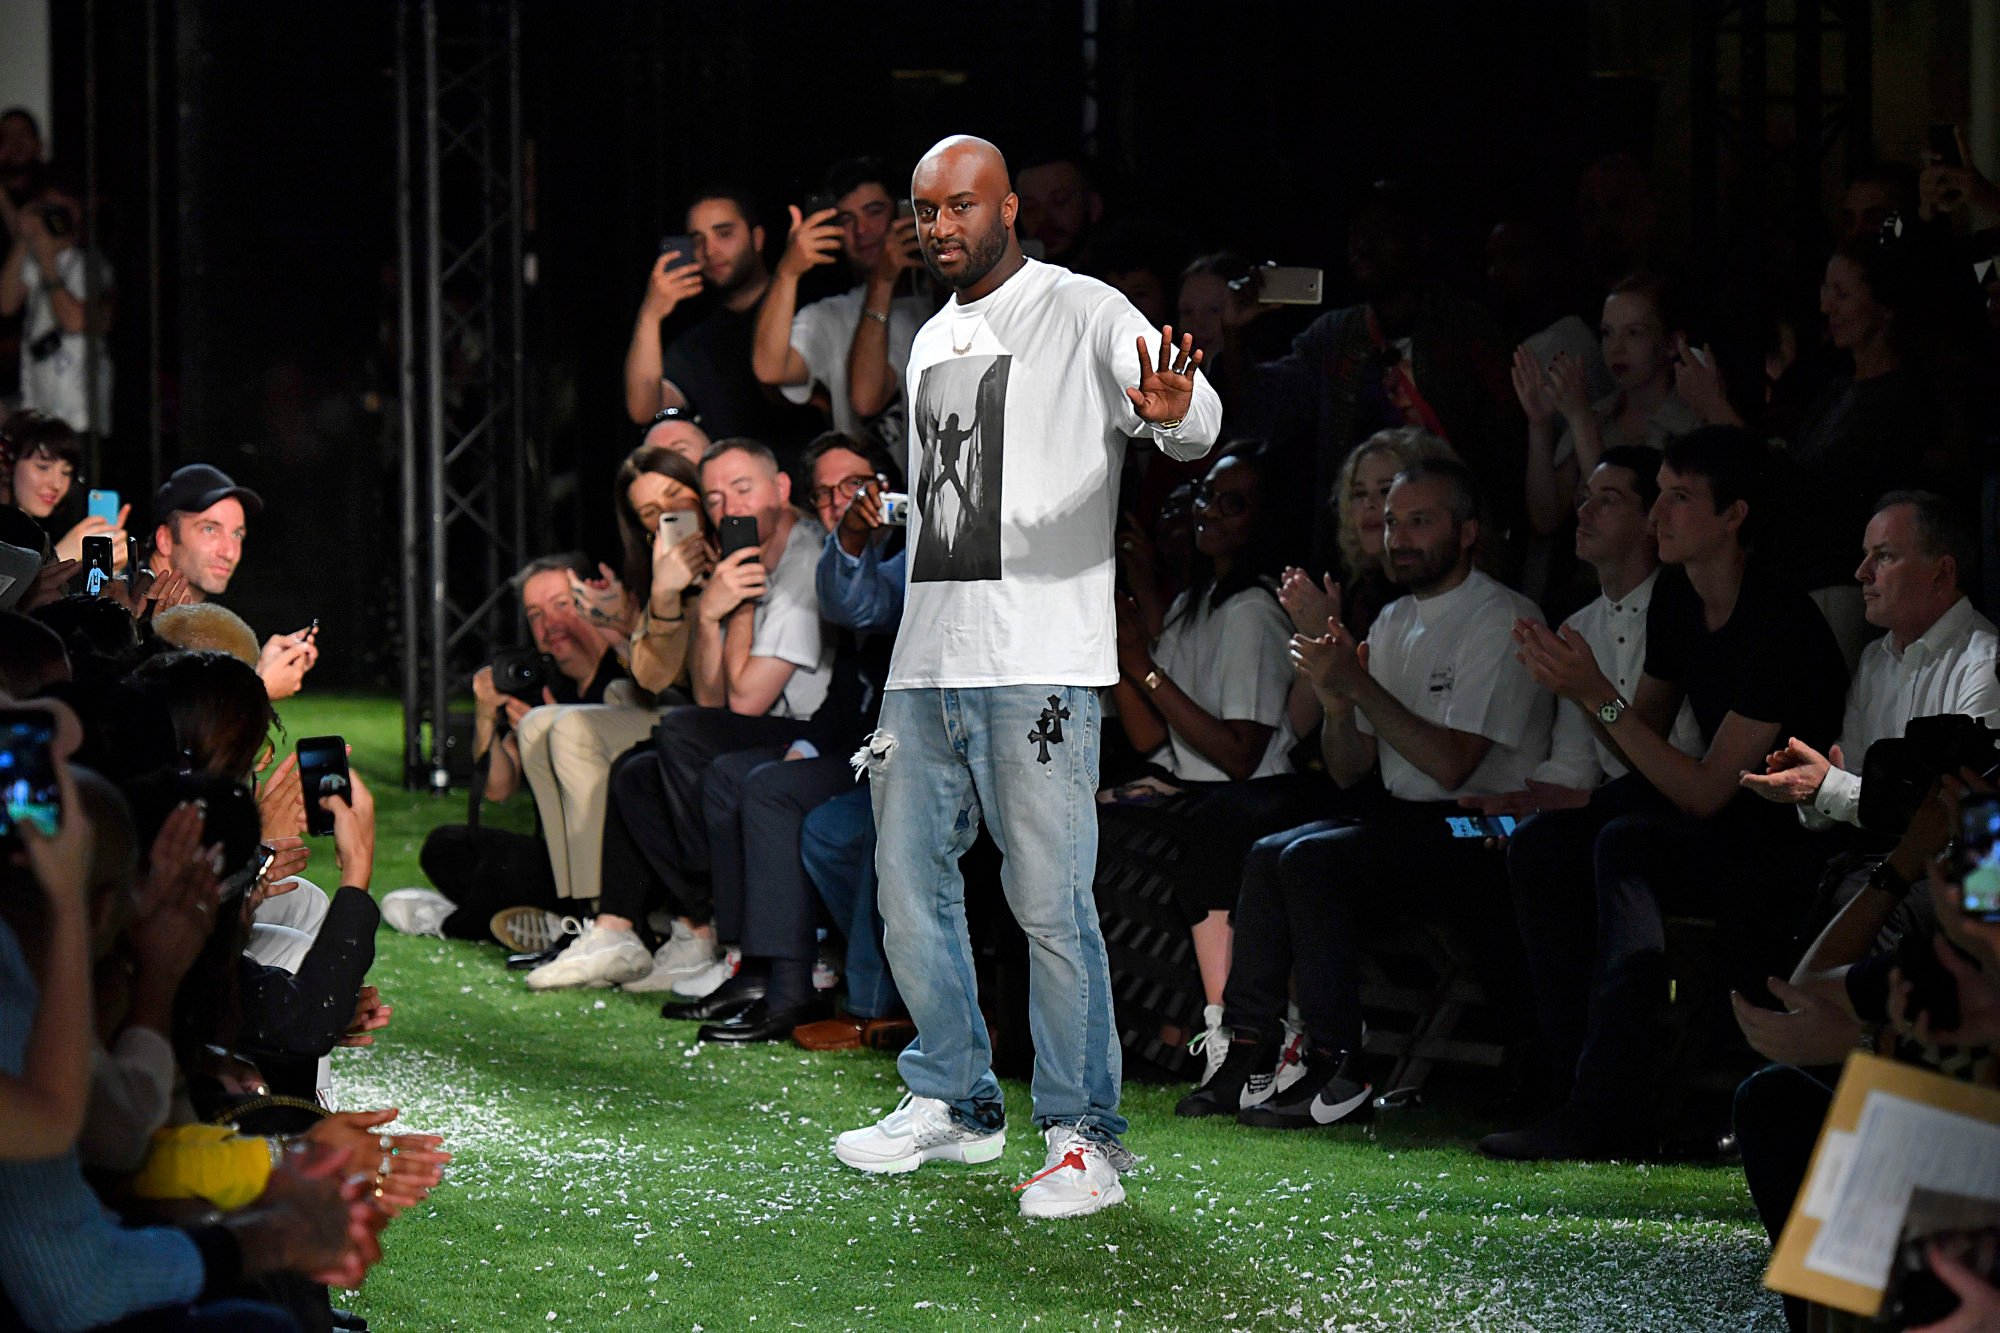 How Virgil Abloh of Off-White and Louis Vuitton inspired a Hong Kong NFT  fashion CEO to tell stories through his designs